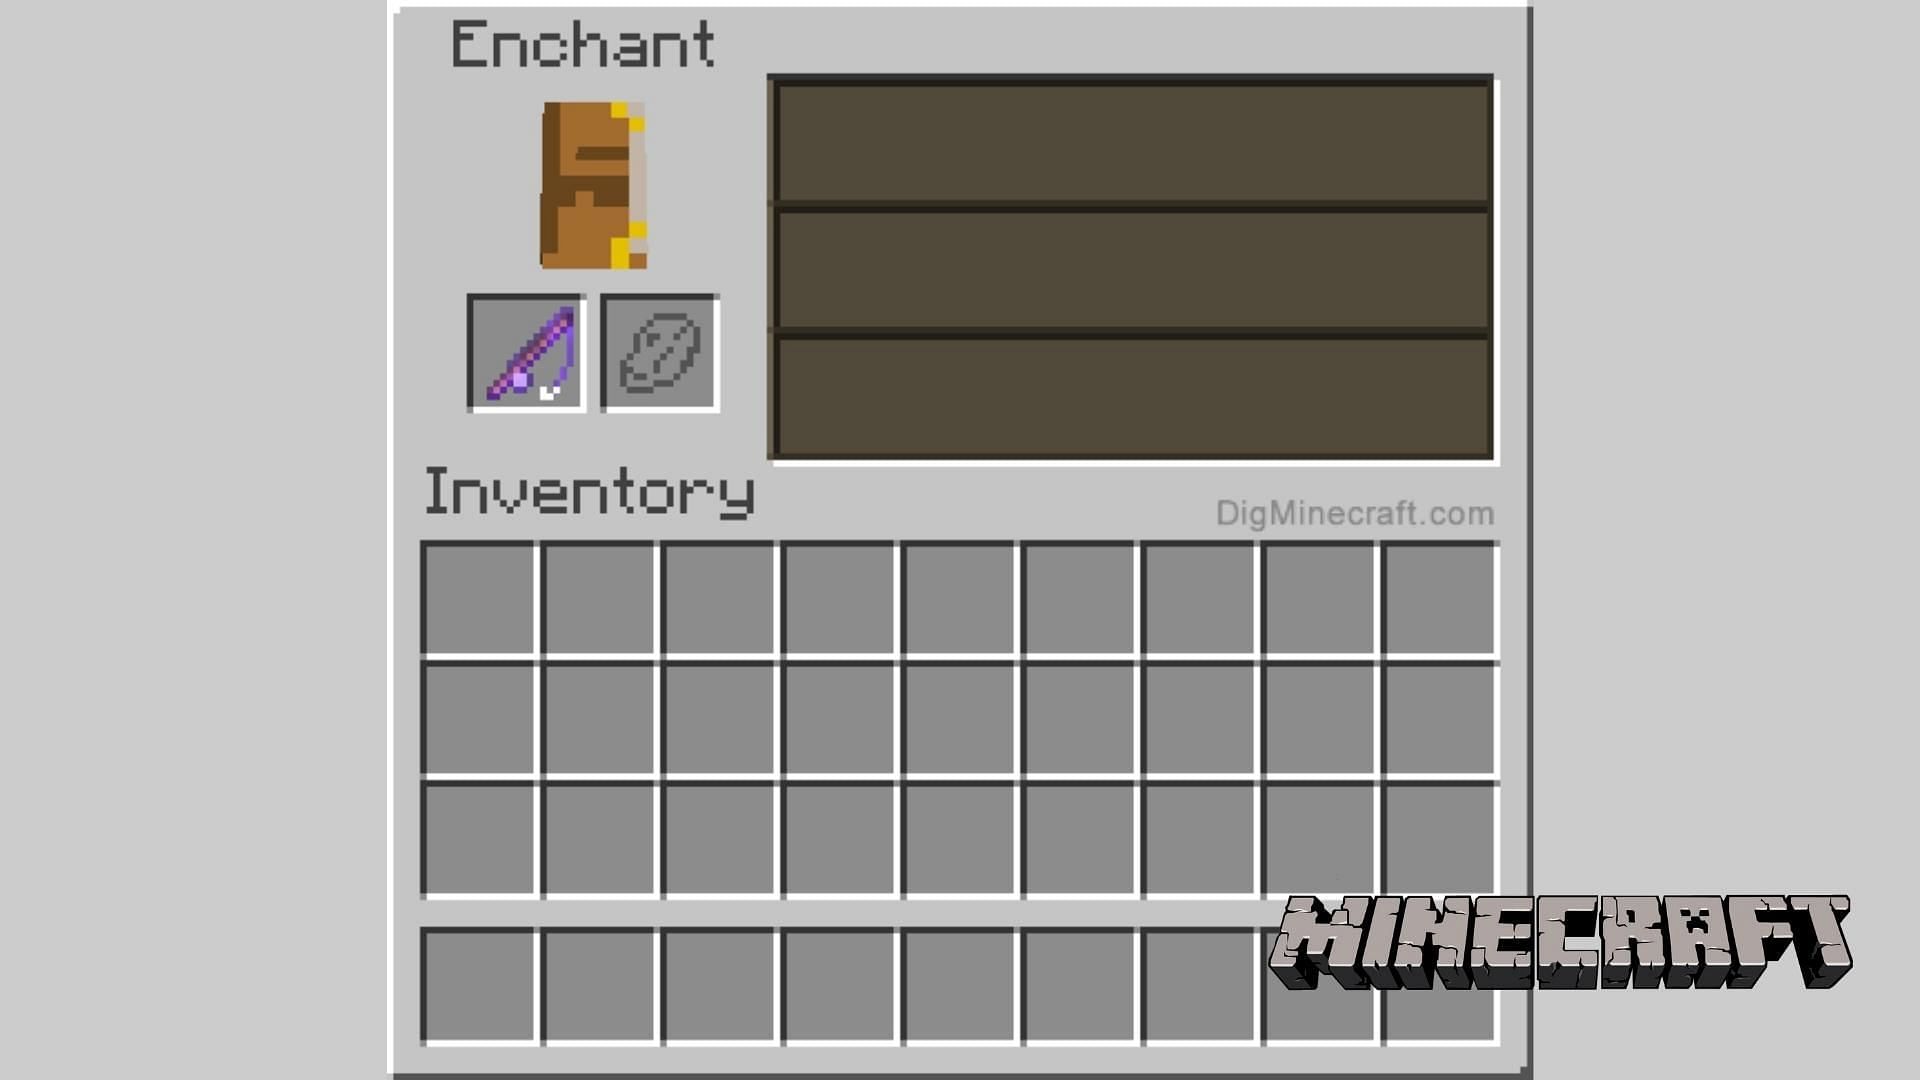 A successfully created enchanted fishing rod (Image via DigMinecraft)